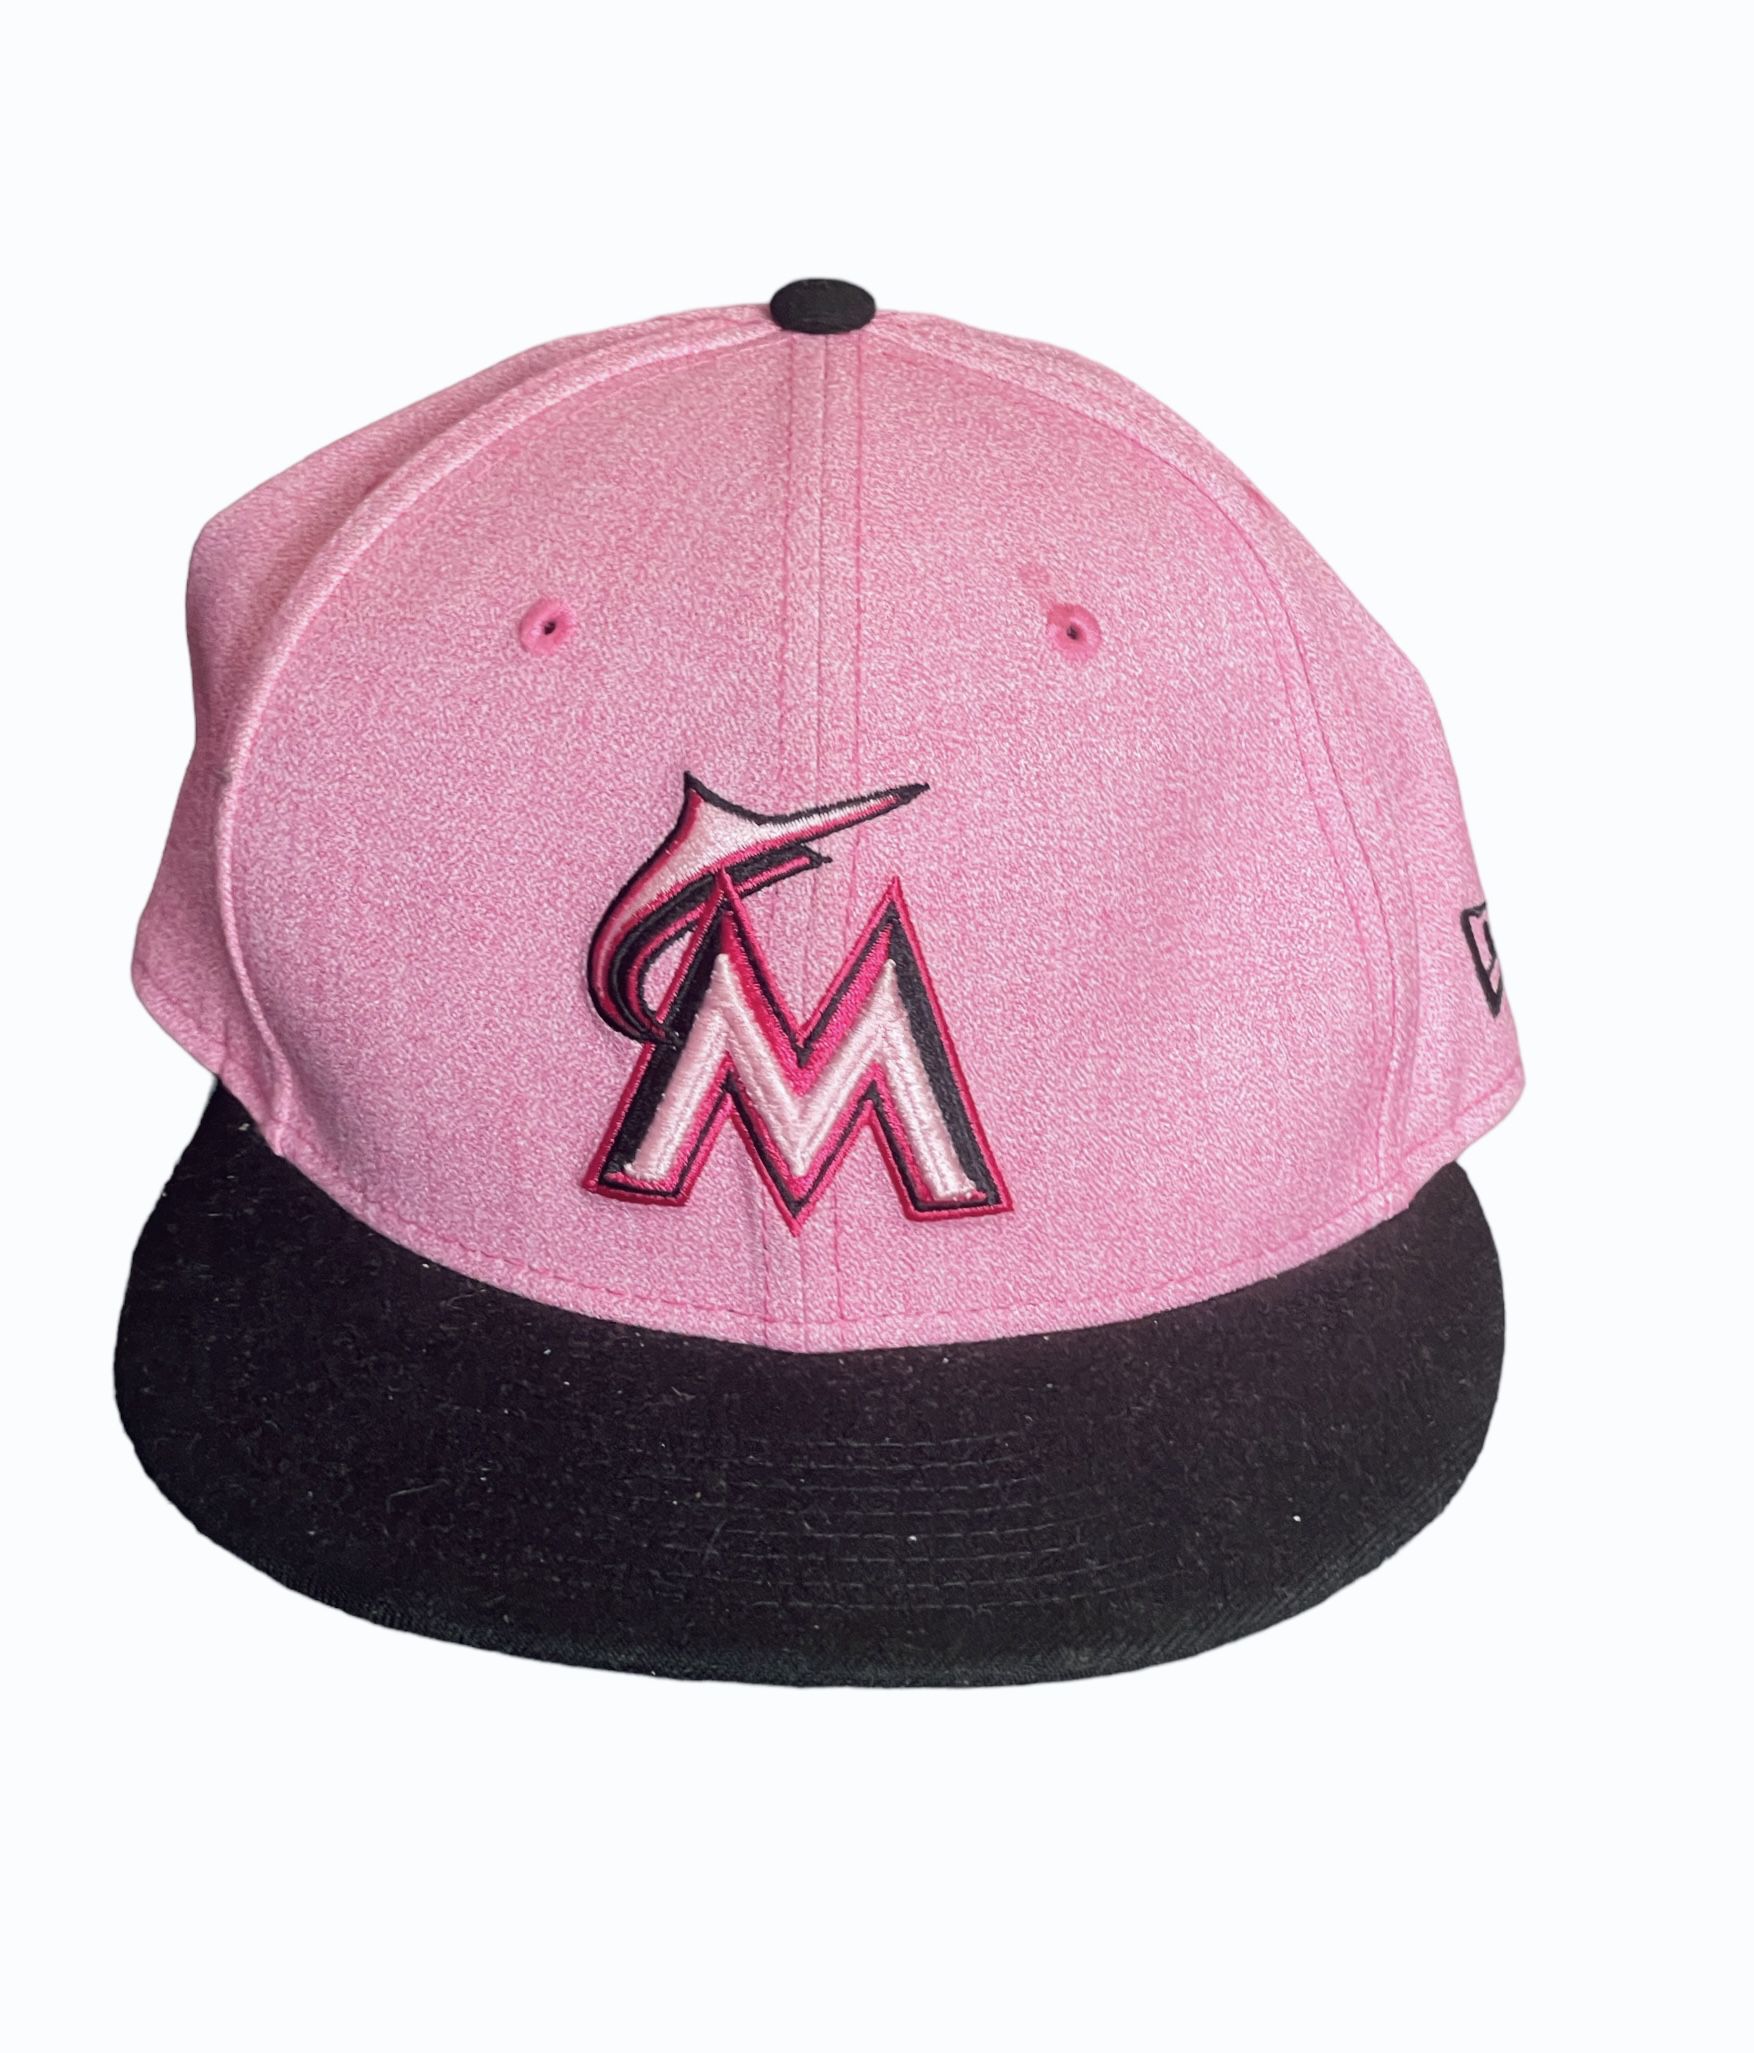 New Era Miami Marlins Mothers Day Hat Pink /black size 7 1/2 NWOT